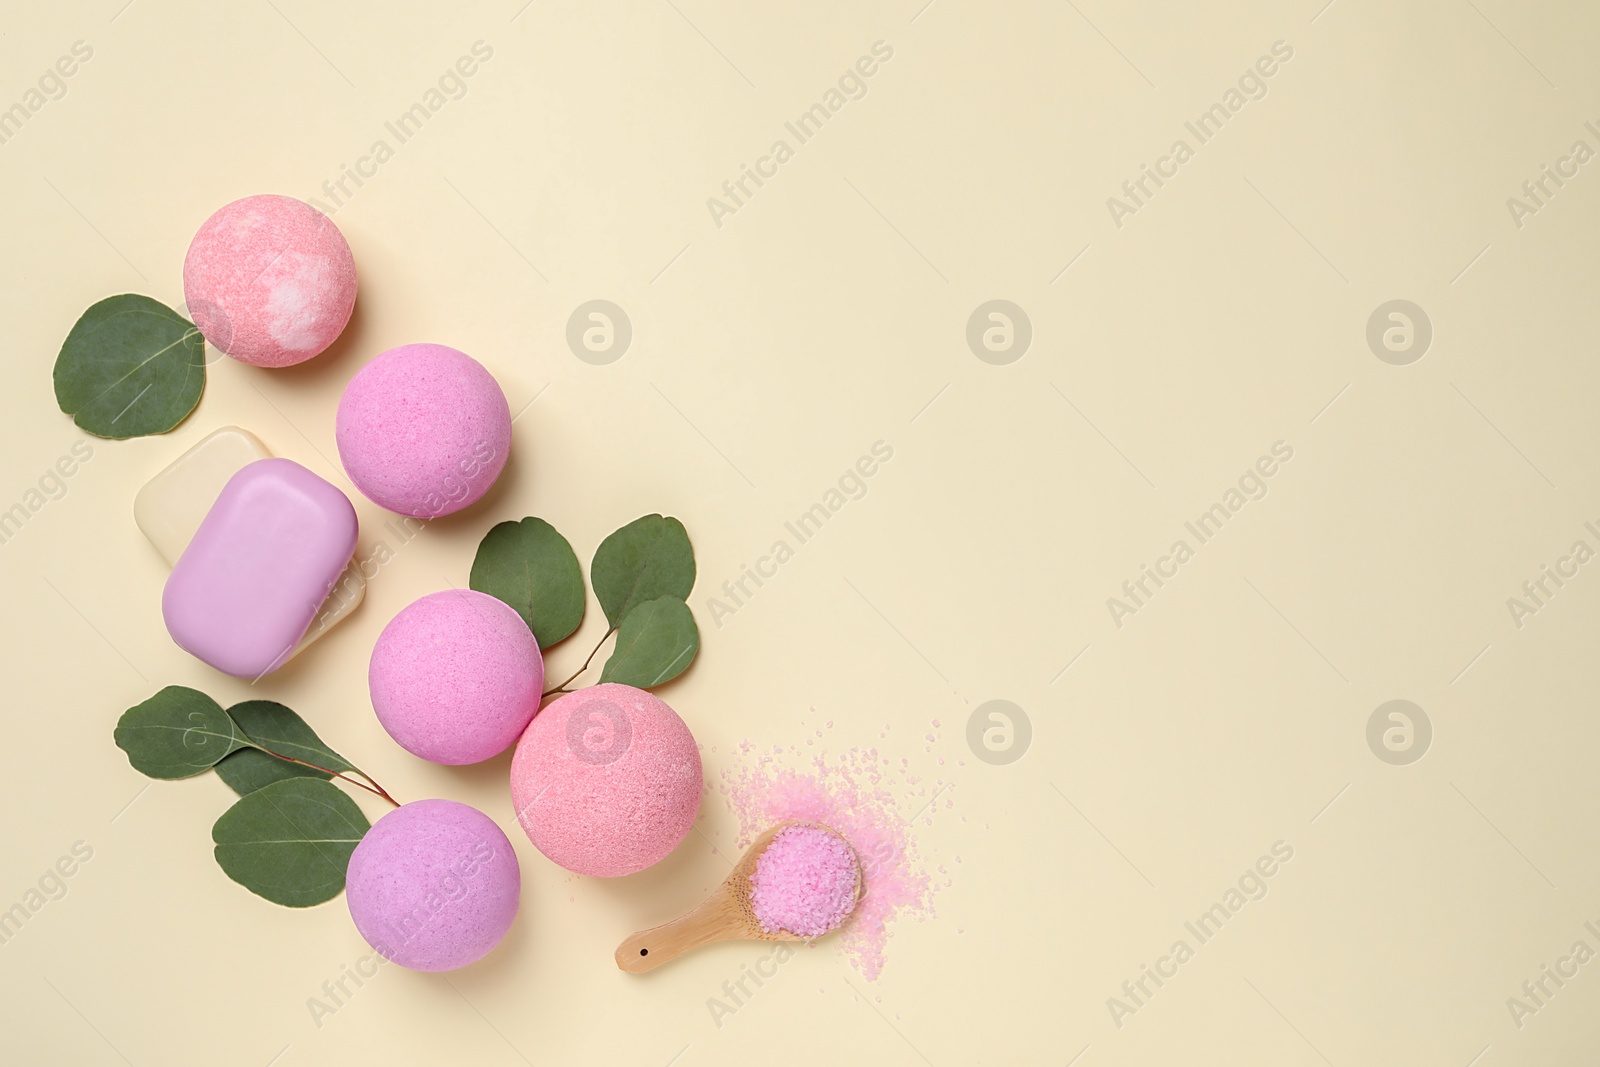 Photo of Bath bombs, eucalyptus leaves, sea salt and soap bars on beige background, flat lay. Space for text